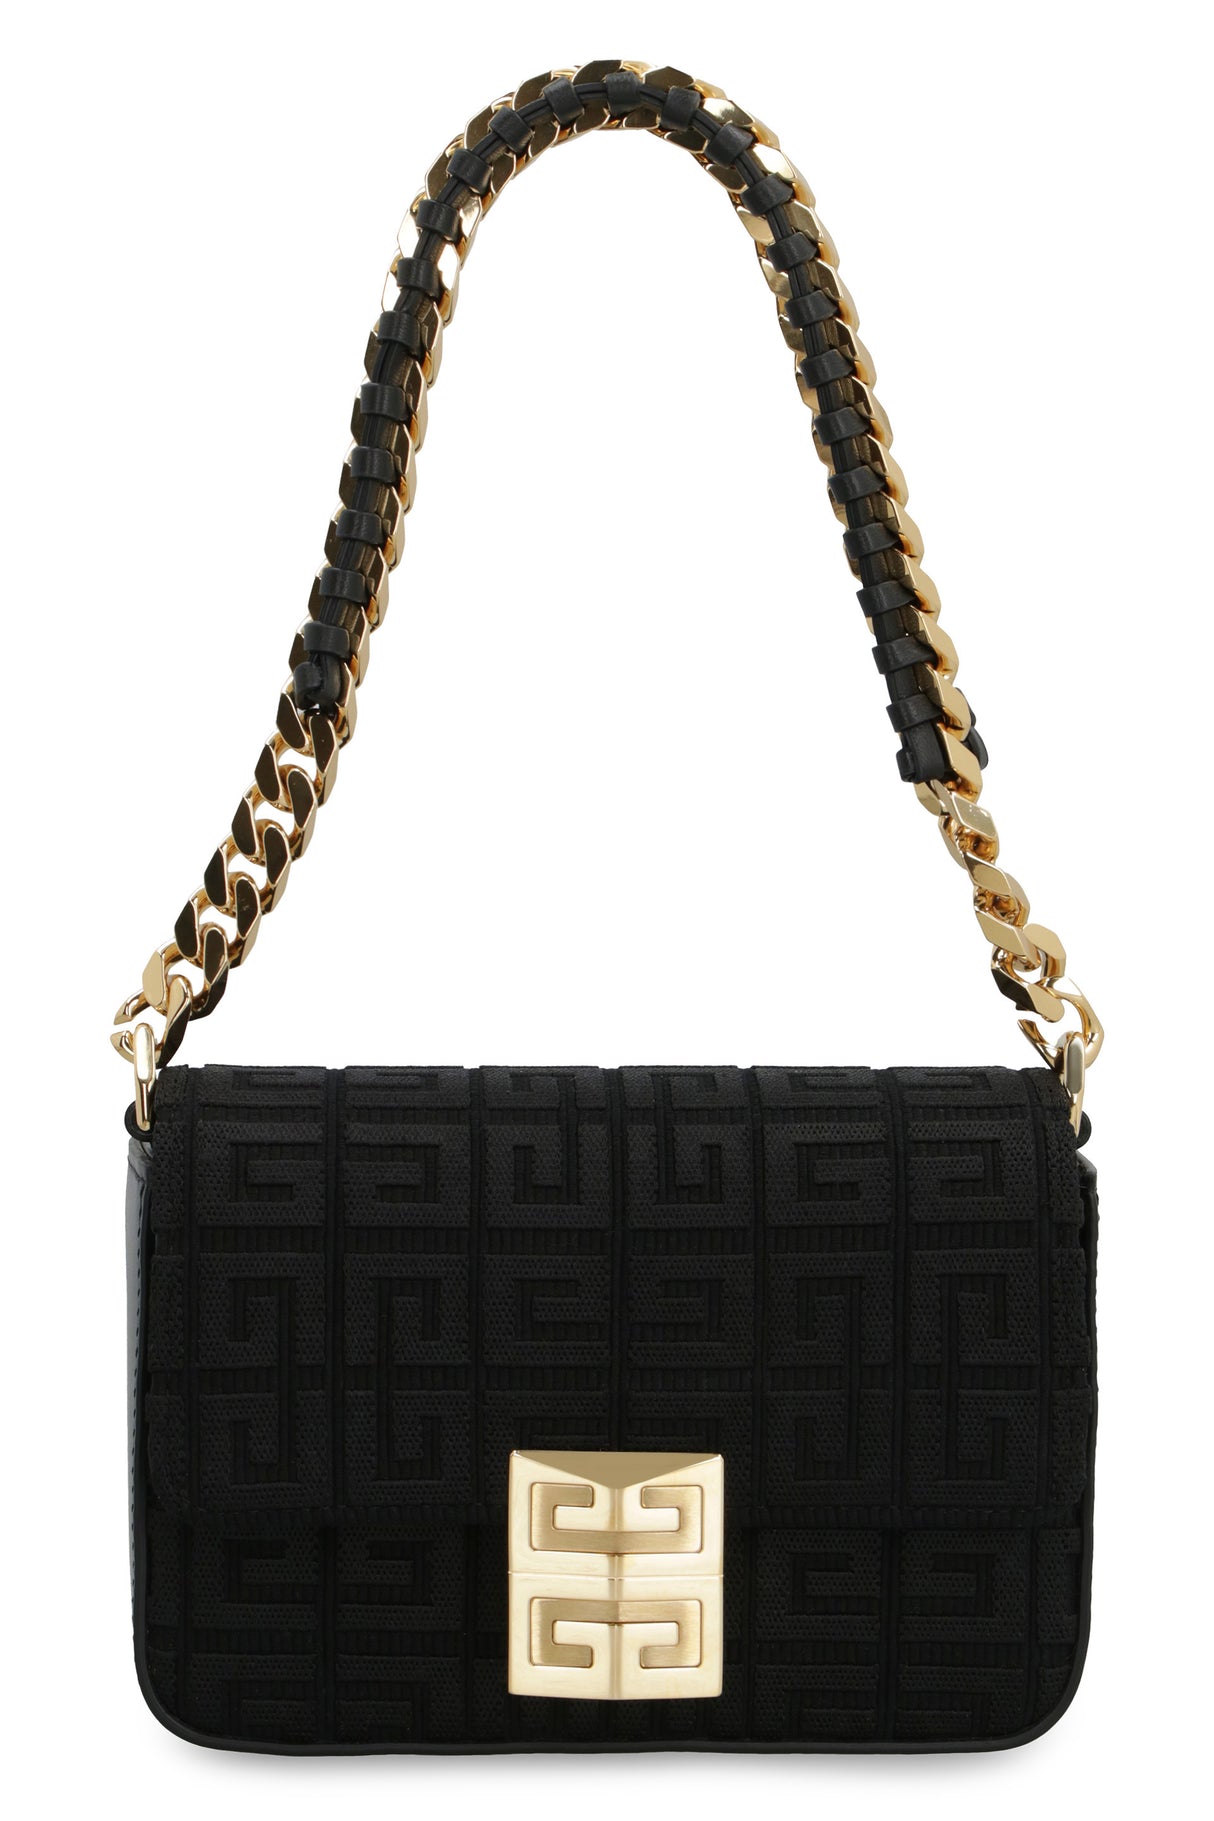 GIVENCHY Black Canvas Embroidered 4G Mini Handbag with Leather-Interlaced Chain Strap and Gold-Tone Accents